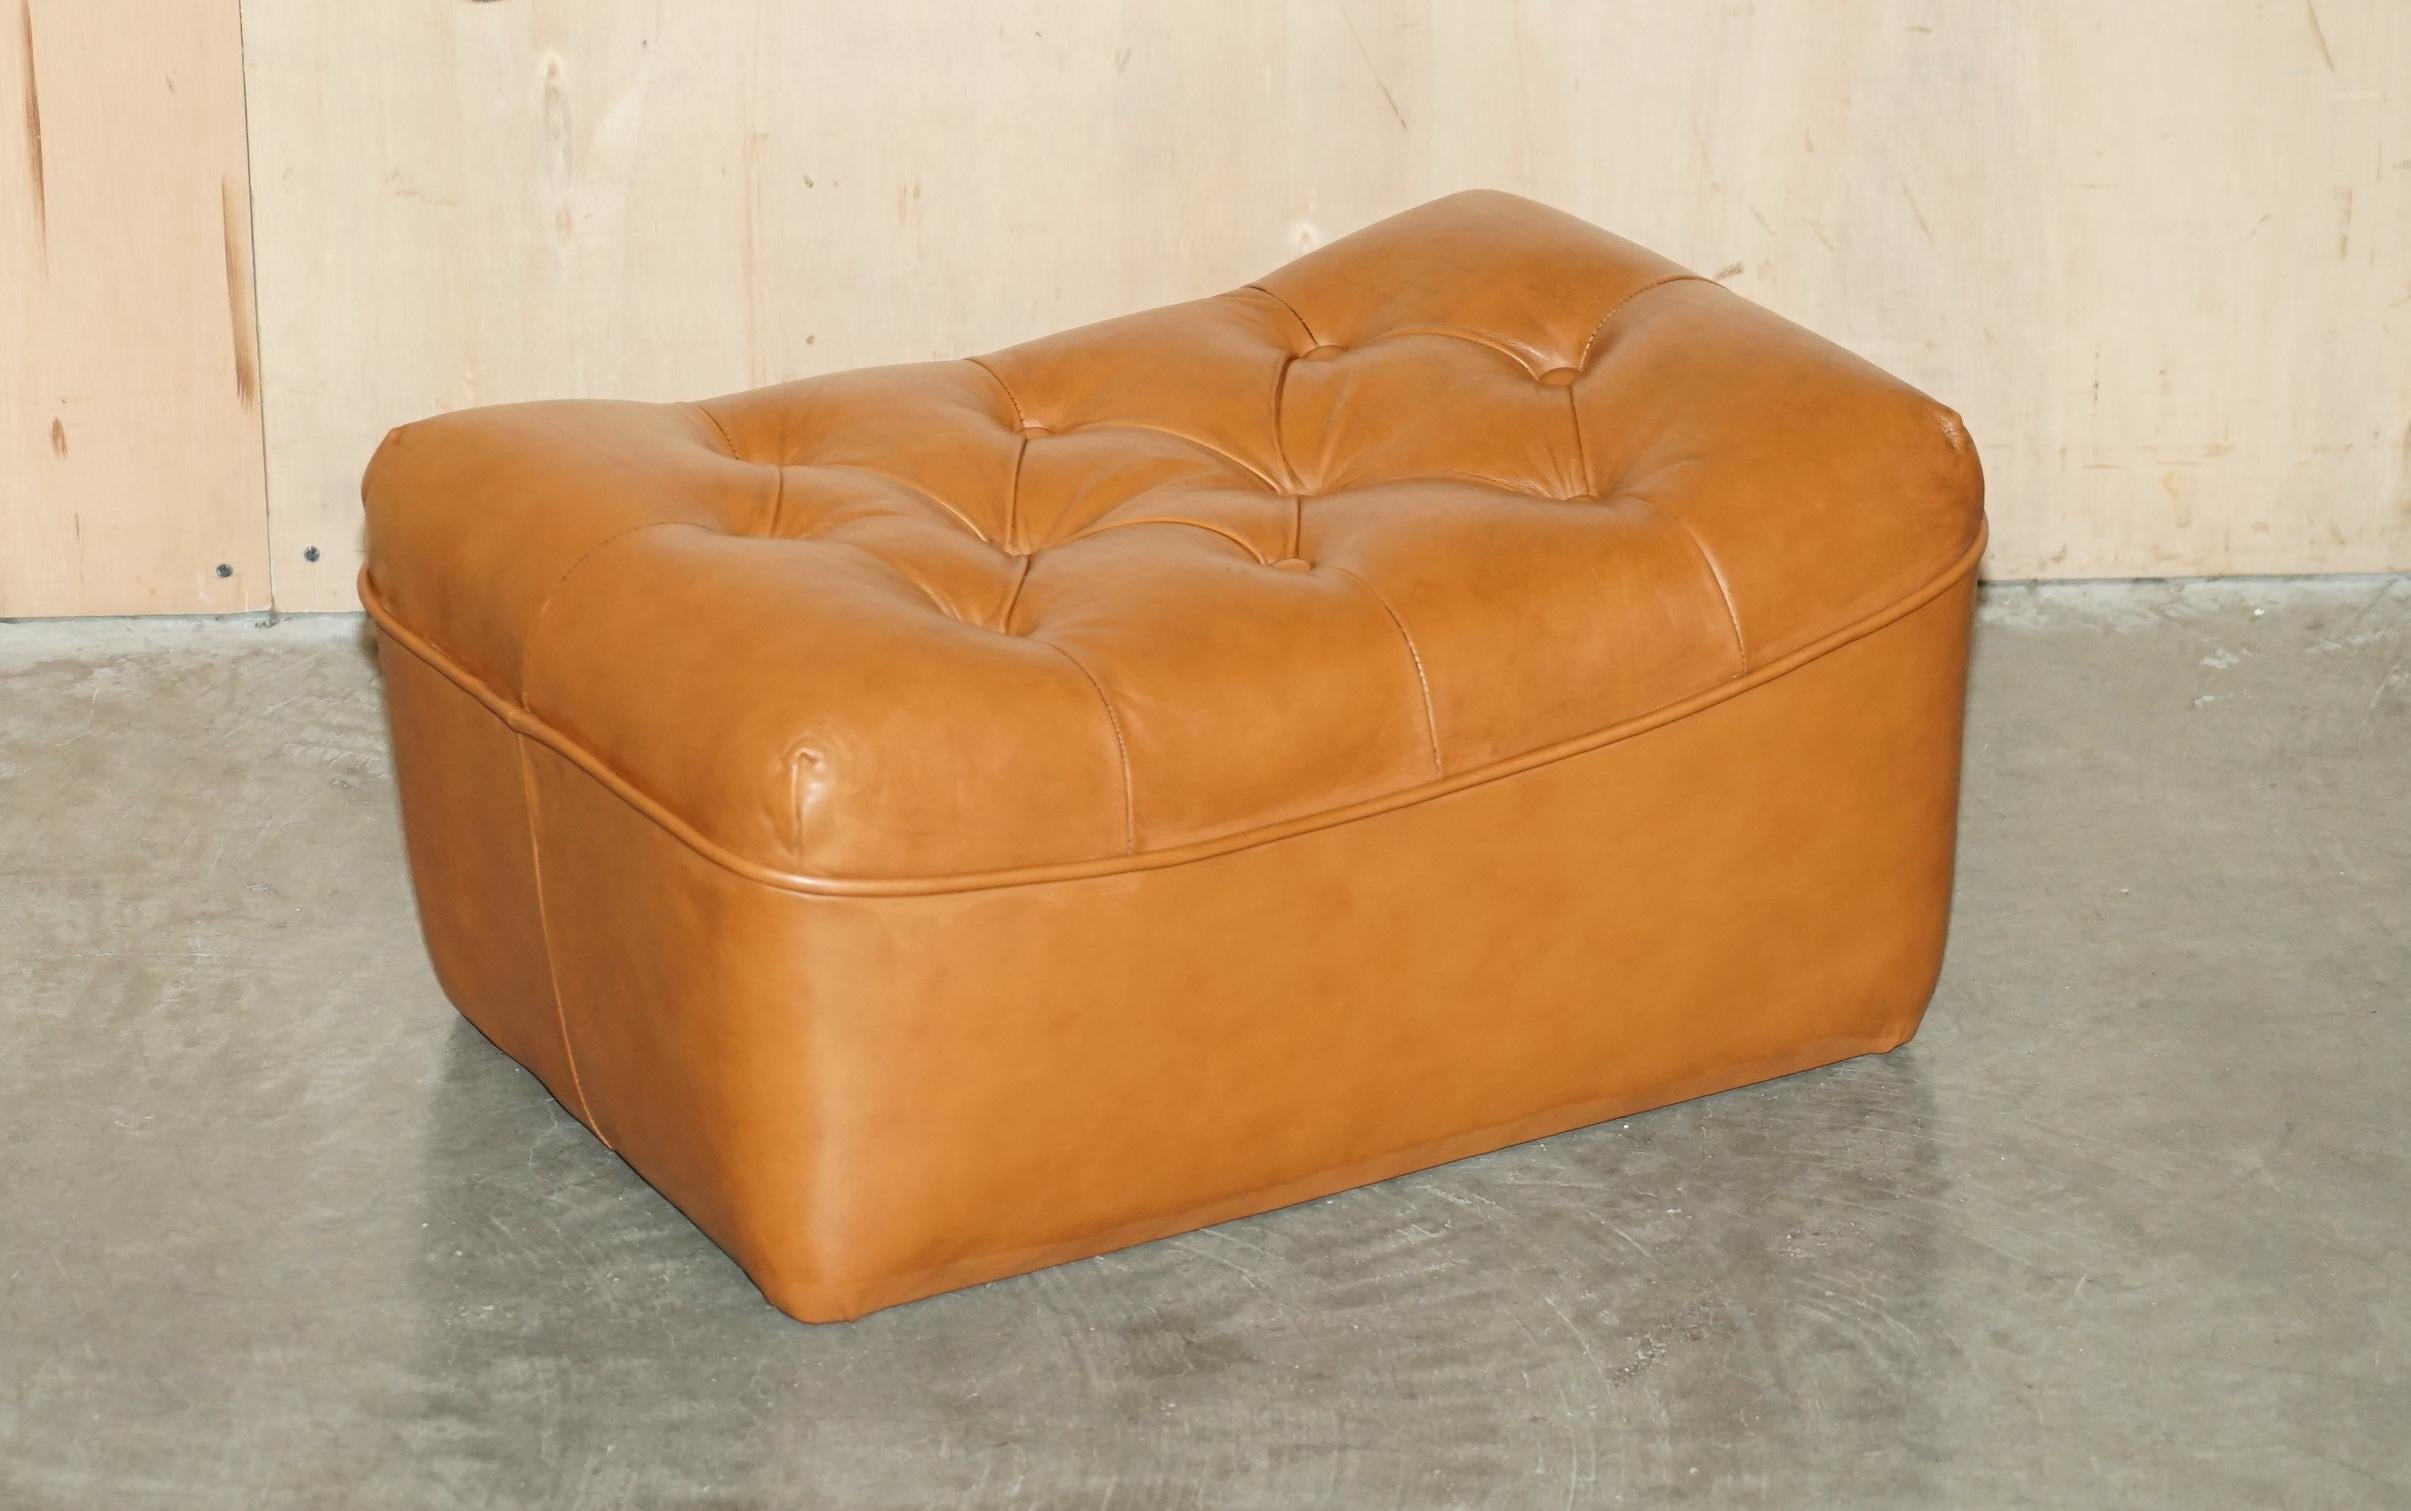 Royal House Antiques

Royal House Antiques is delighted to offer for sale this lovely Vintage Mid Century Modern circa 1970's Tan brown leather chesterfield tufted footstool

A good looking and comfortable stool, it has a nice heritage patina to